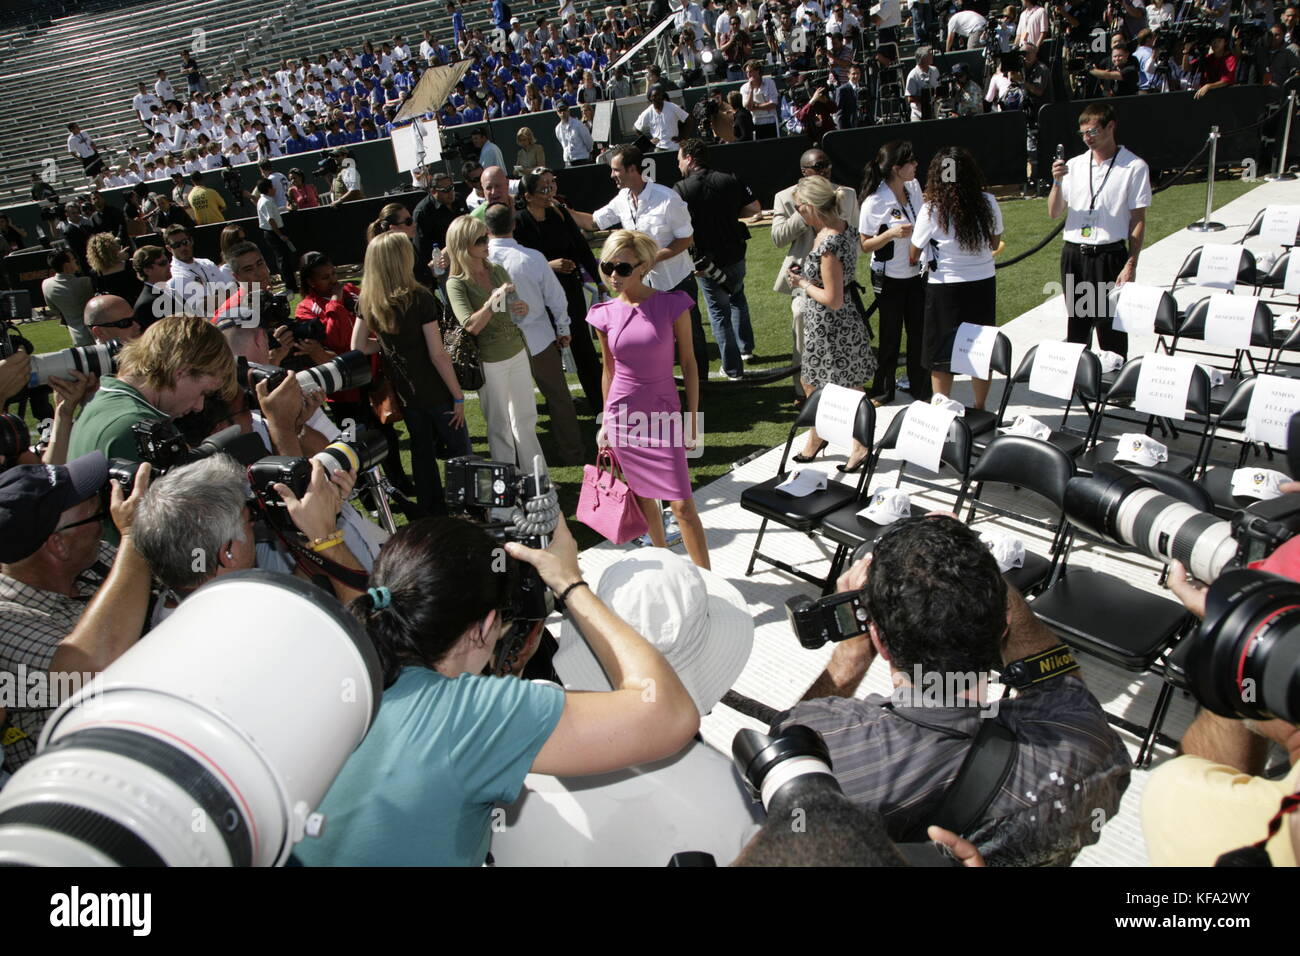 Victoria Beckham is mobbed by photographers at the official presentation of David Beckham to the Los Angeles Galaxy at the Home Depot Center in Carson, CA on July 13, 2007. Photo credit: Francis Specker Stock Photo